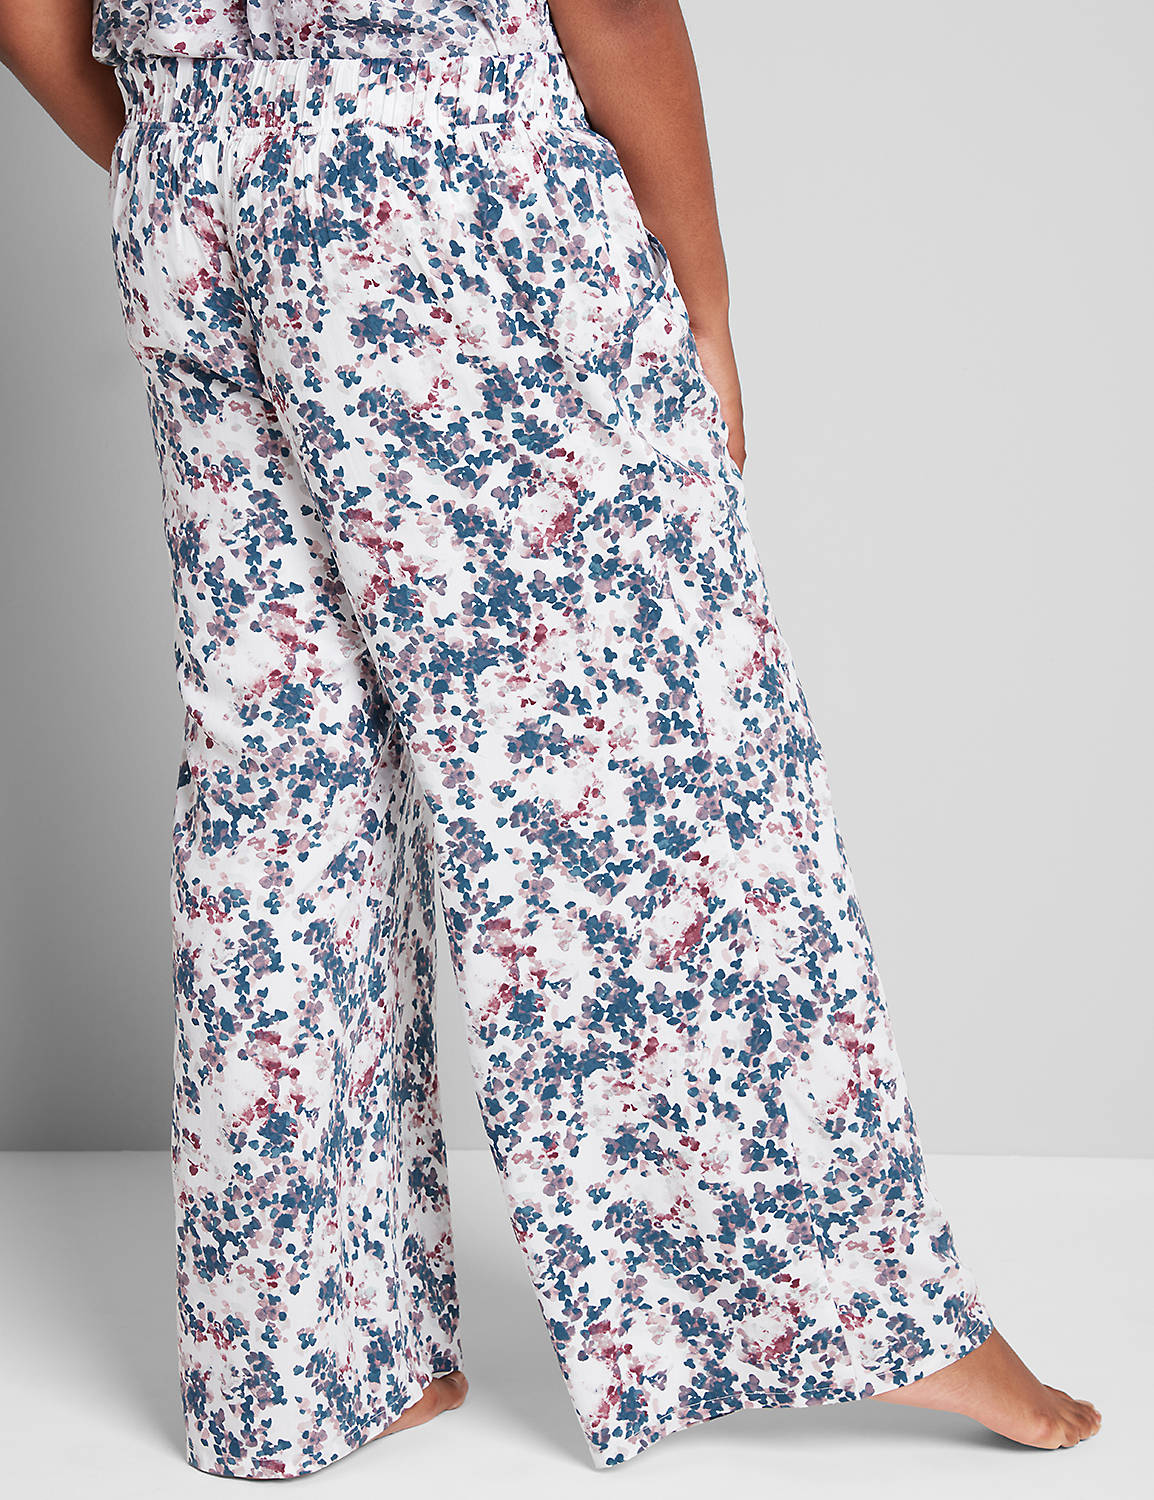 Woven Wide Leg Satin Tie Pant 1112875:Sea Dots_Bright White_CSP17313:14/16 Product Image 2